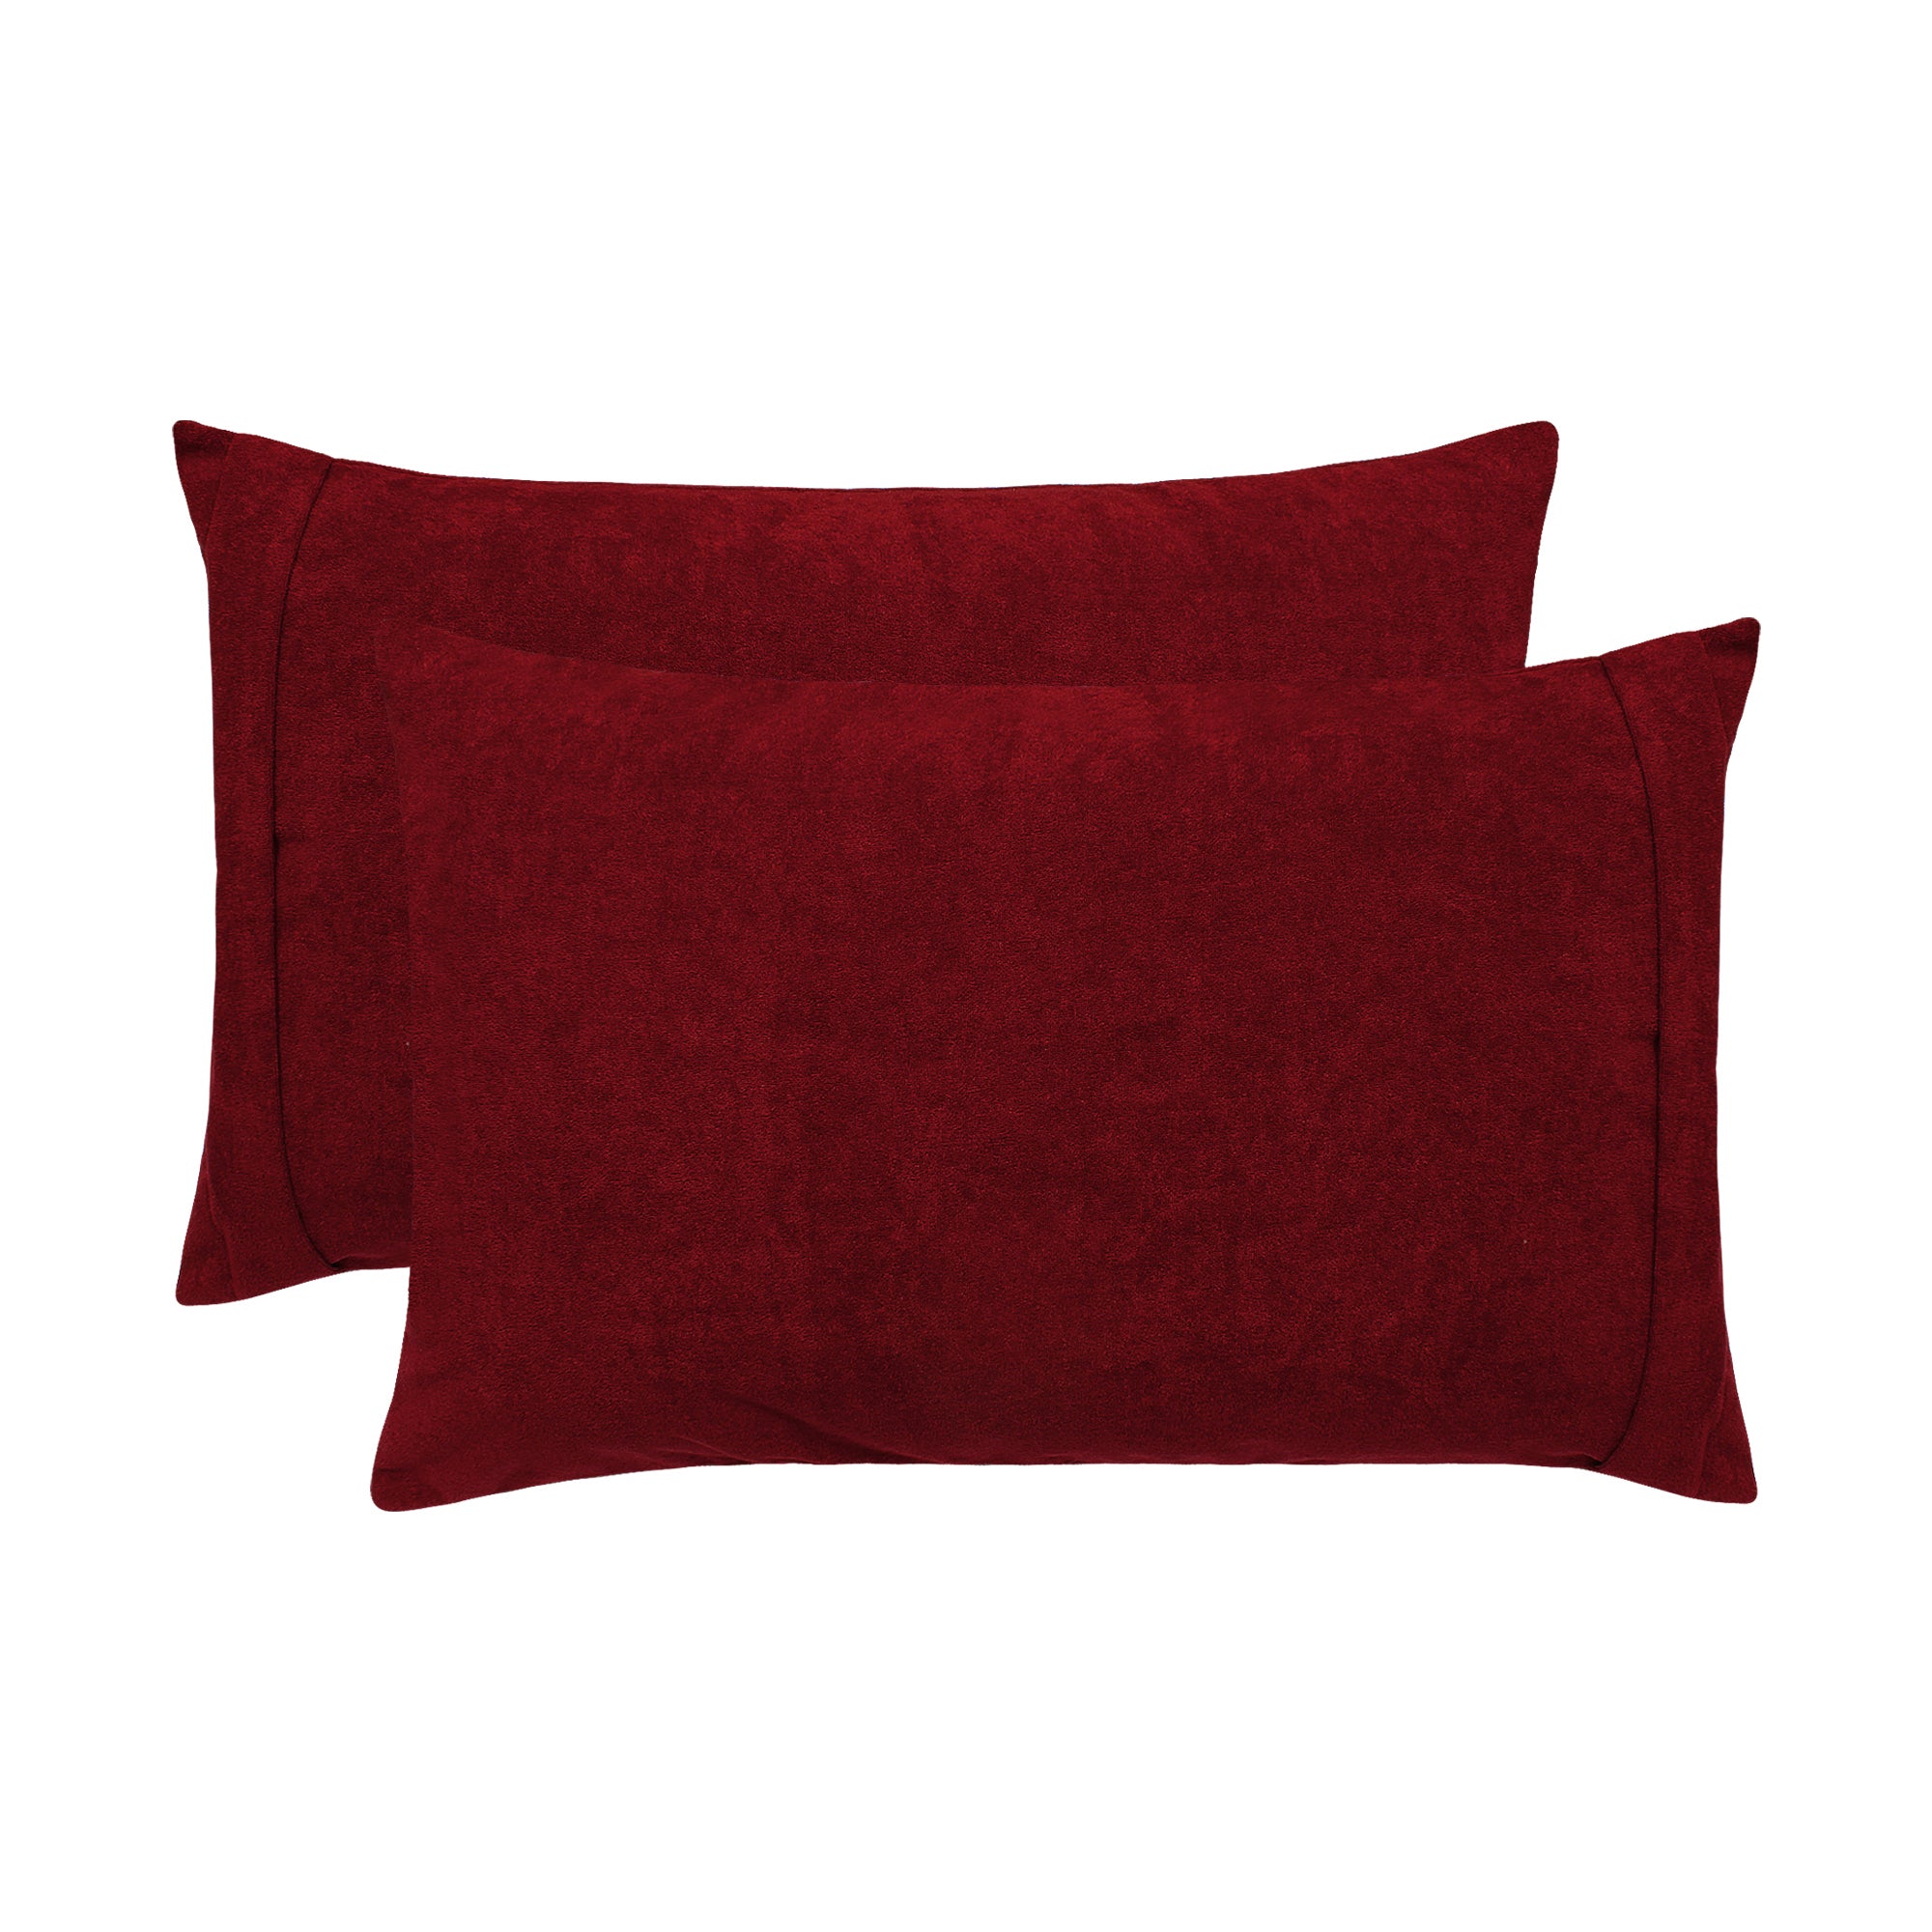 Waterproof Pillow Protector, Set Of 2 Pcs (MAROON) - Dream Care Furnishings Private Limited